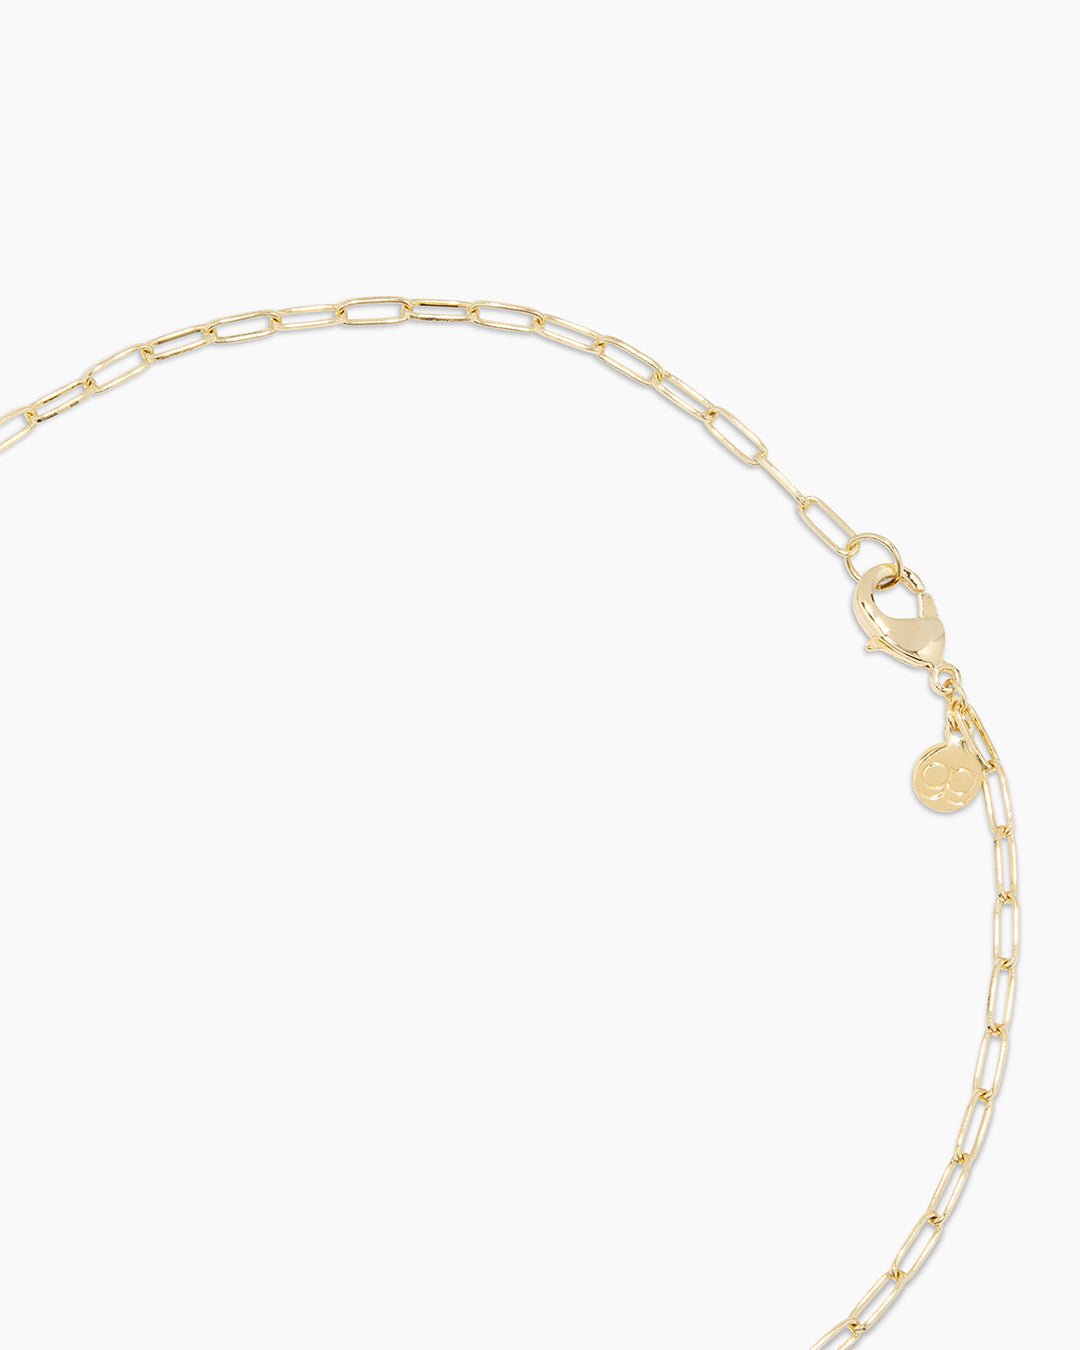 Reese Pearl Necklace || option::Gold Plated, Pearl